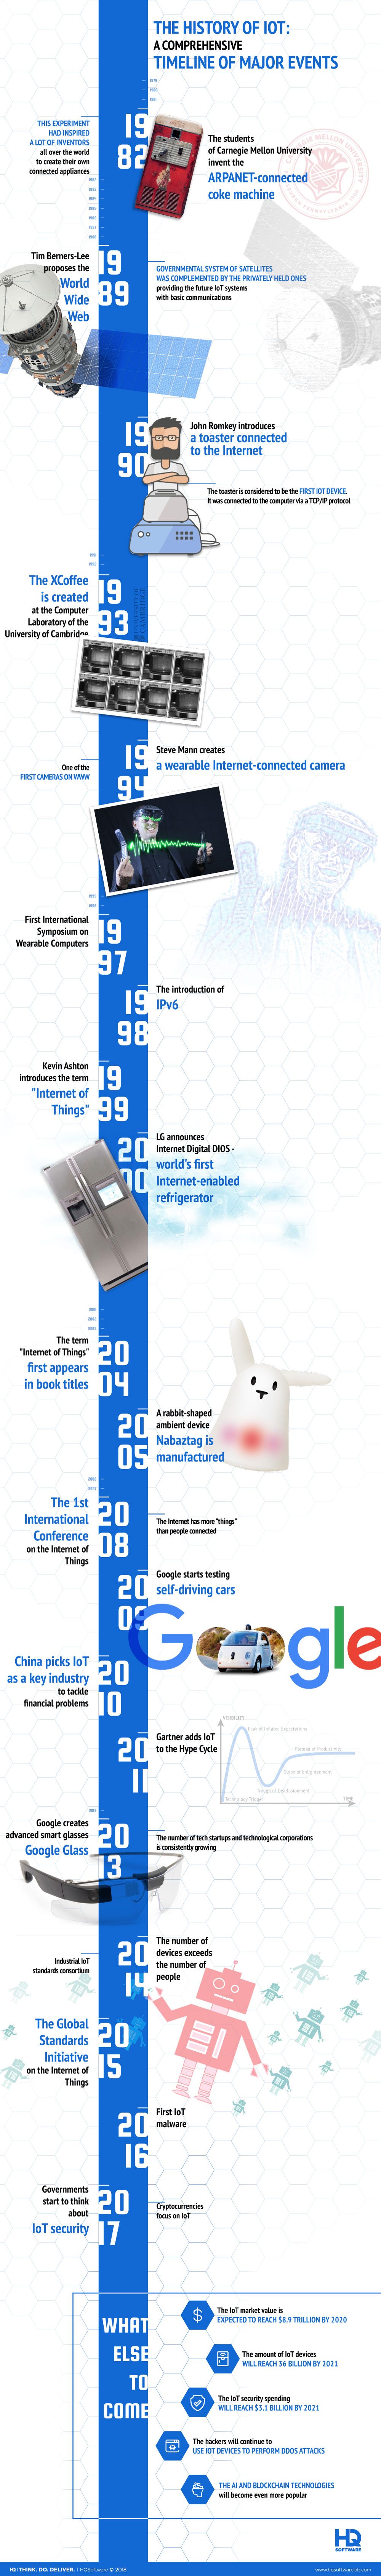 The History Of Iot A Comprehensive Timeline Of Major Events Infographic Hqsoftware